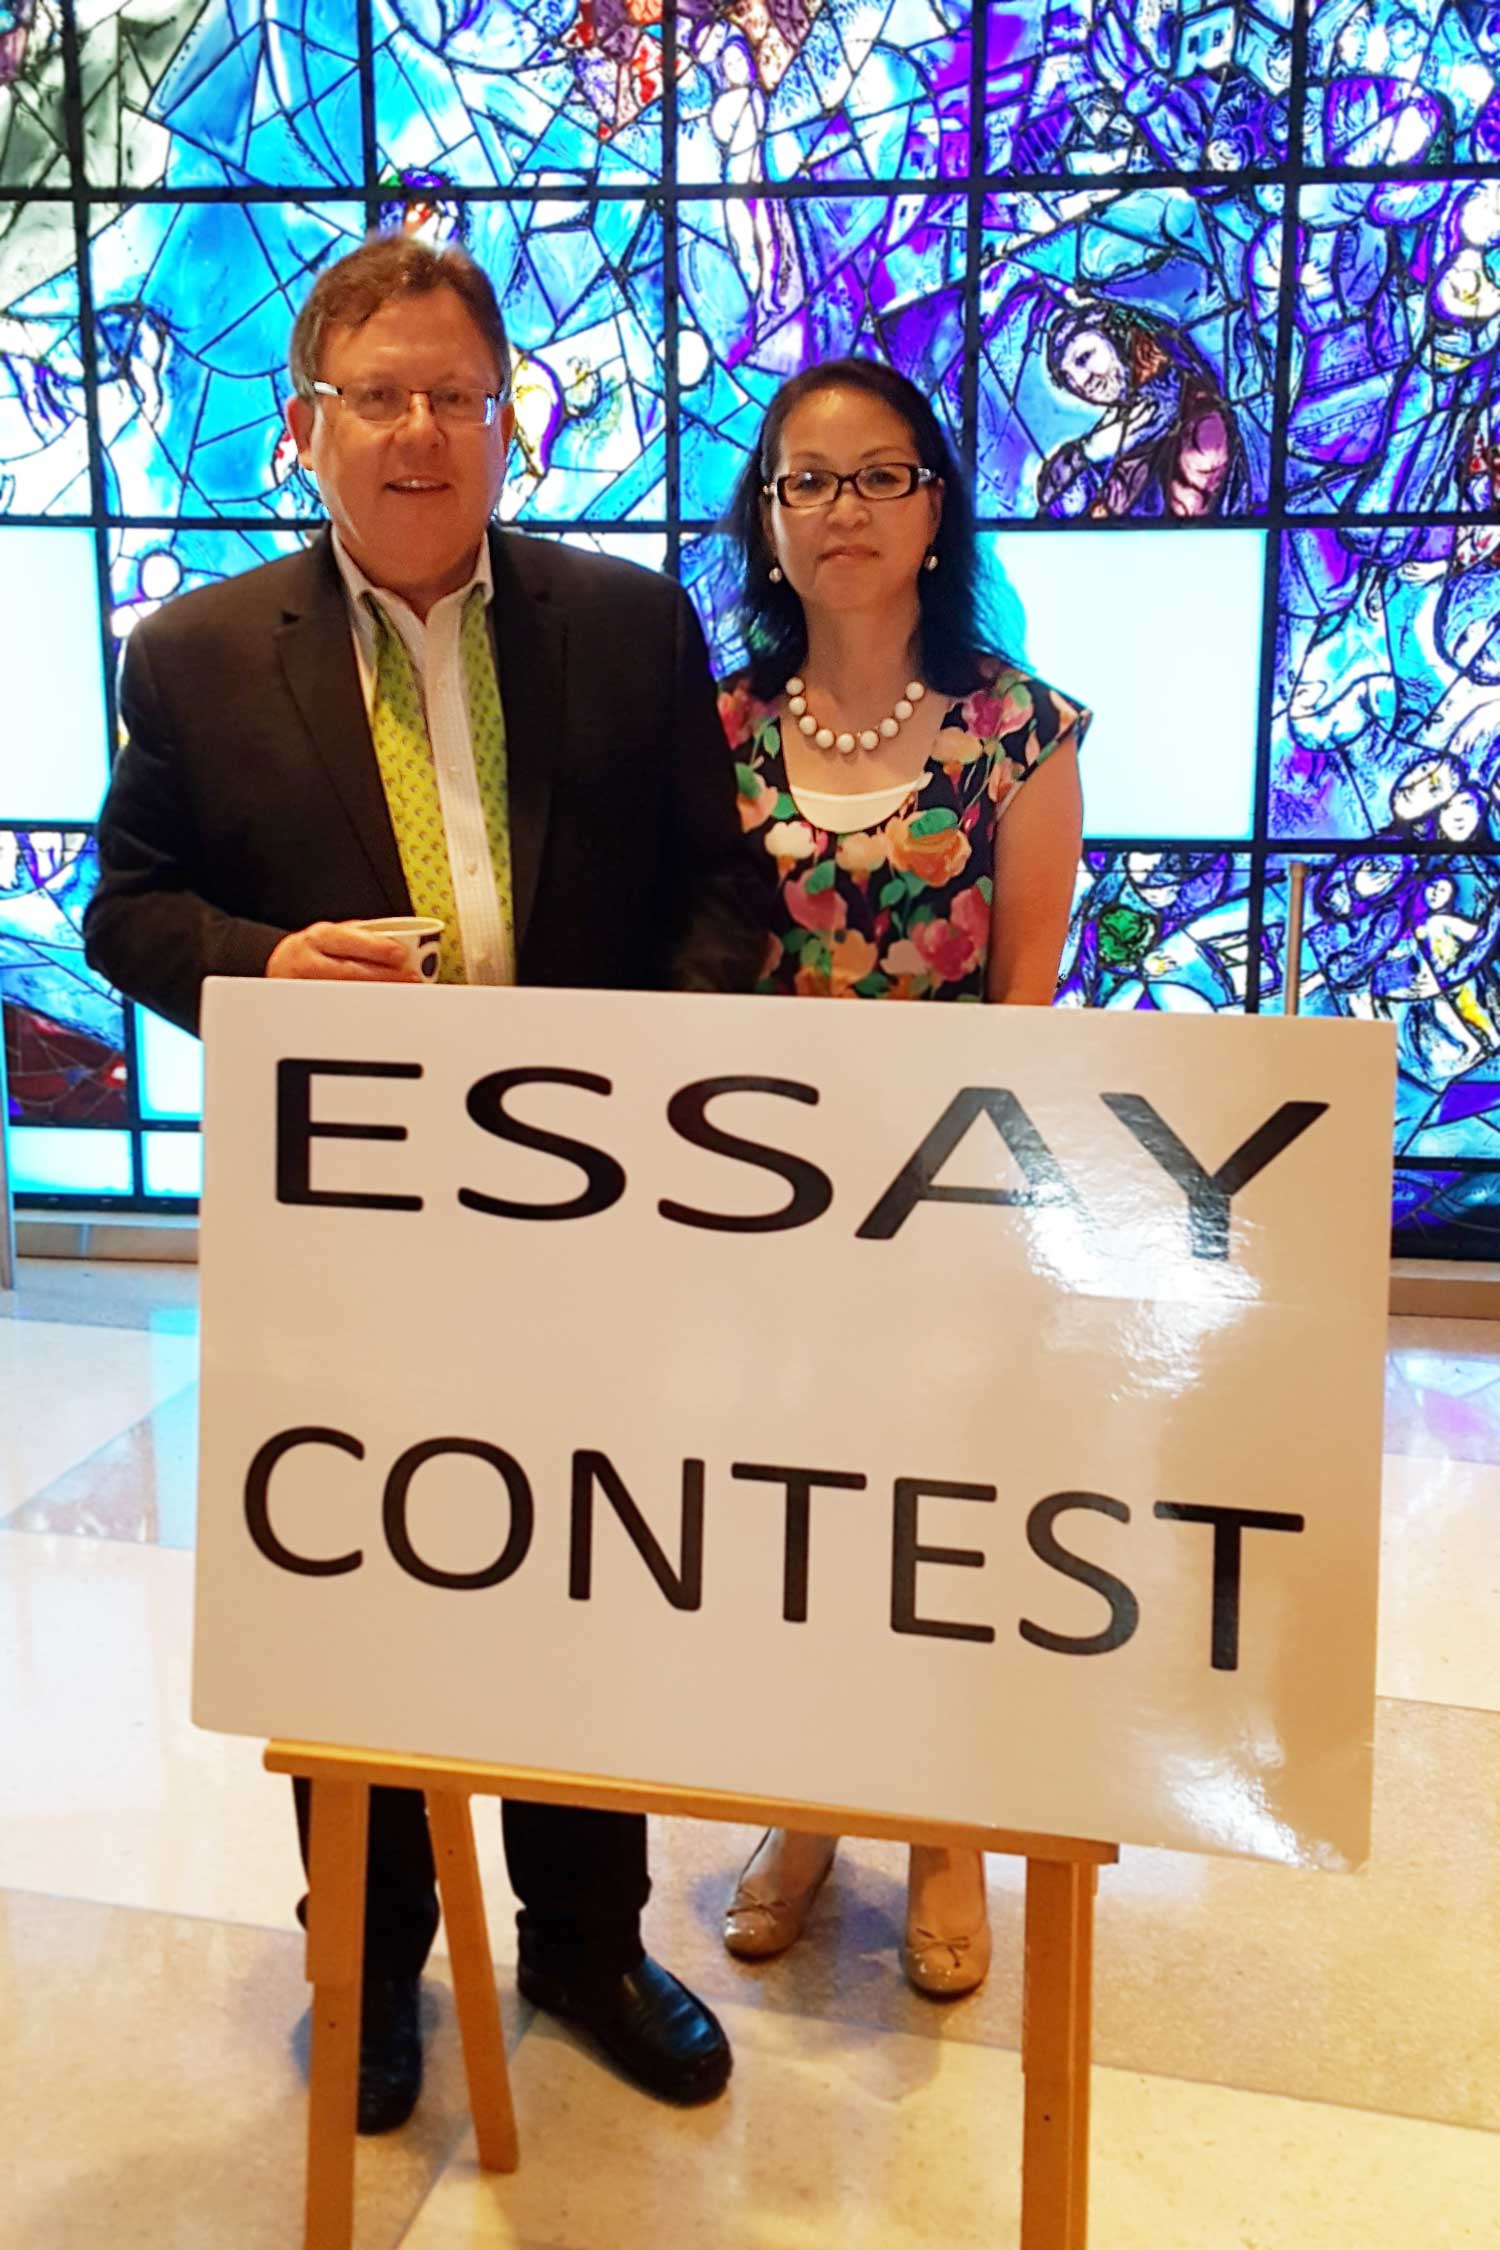 Photo: Mitsuki and Stephen Post with Essay Contest sign and stained glass